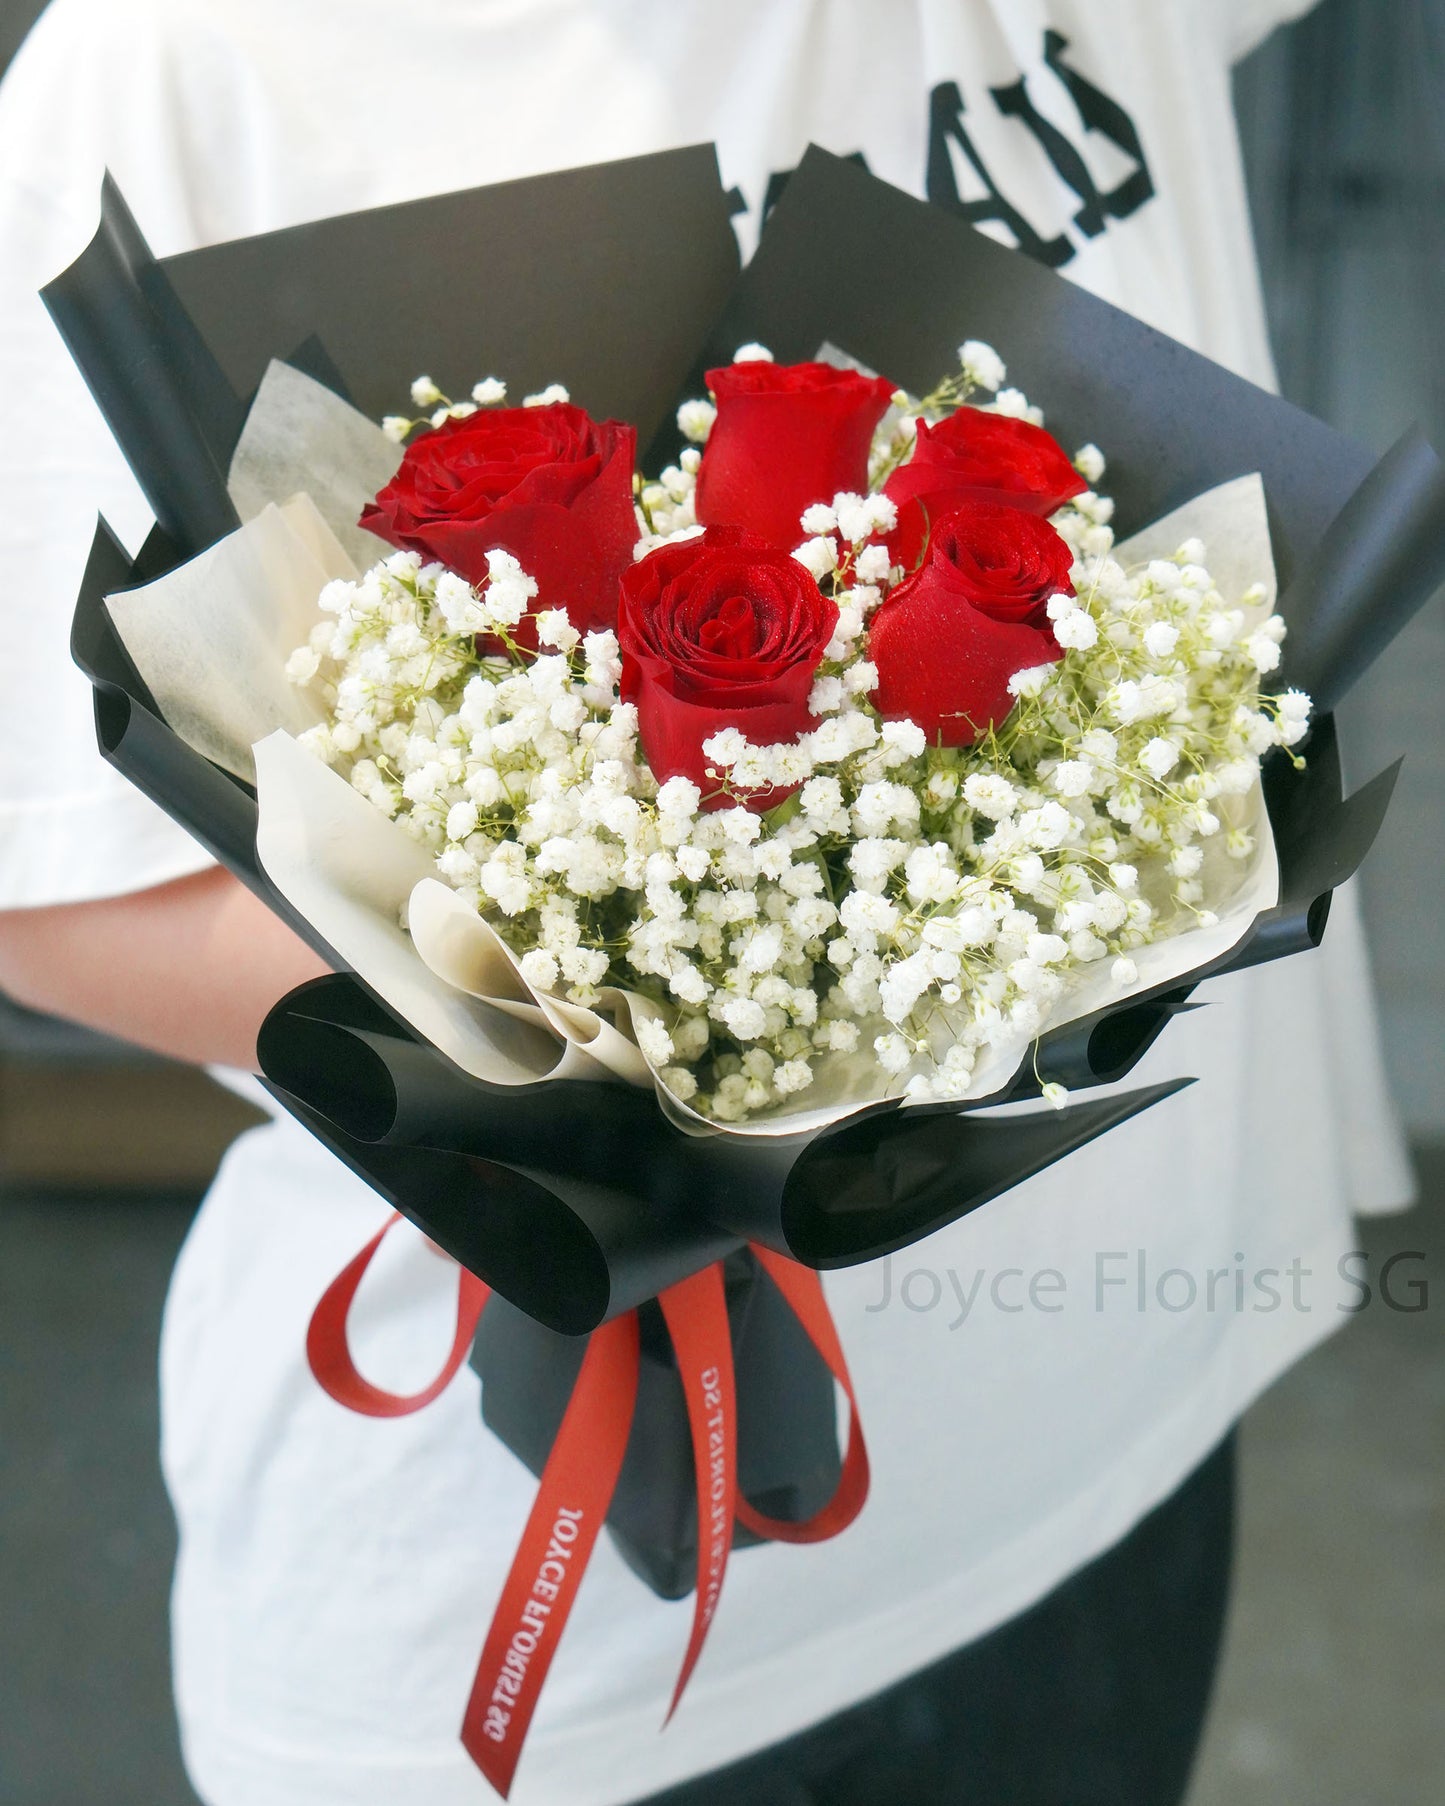 5 Red Rose Bouquet - Red Romance